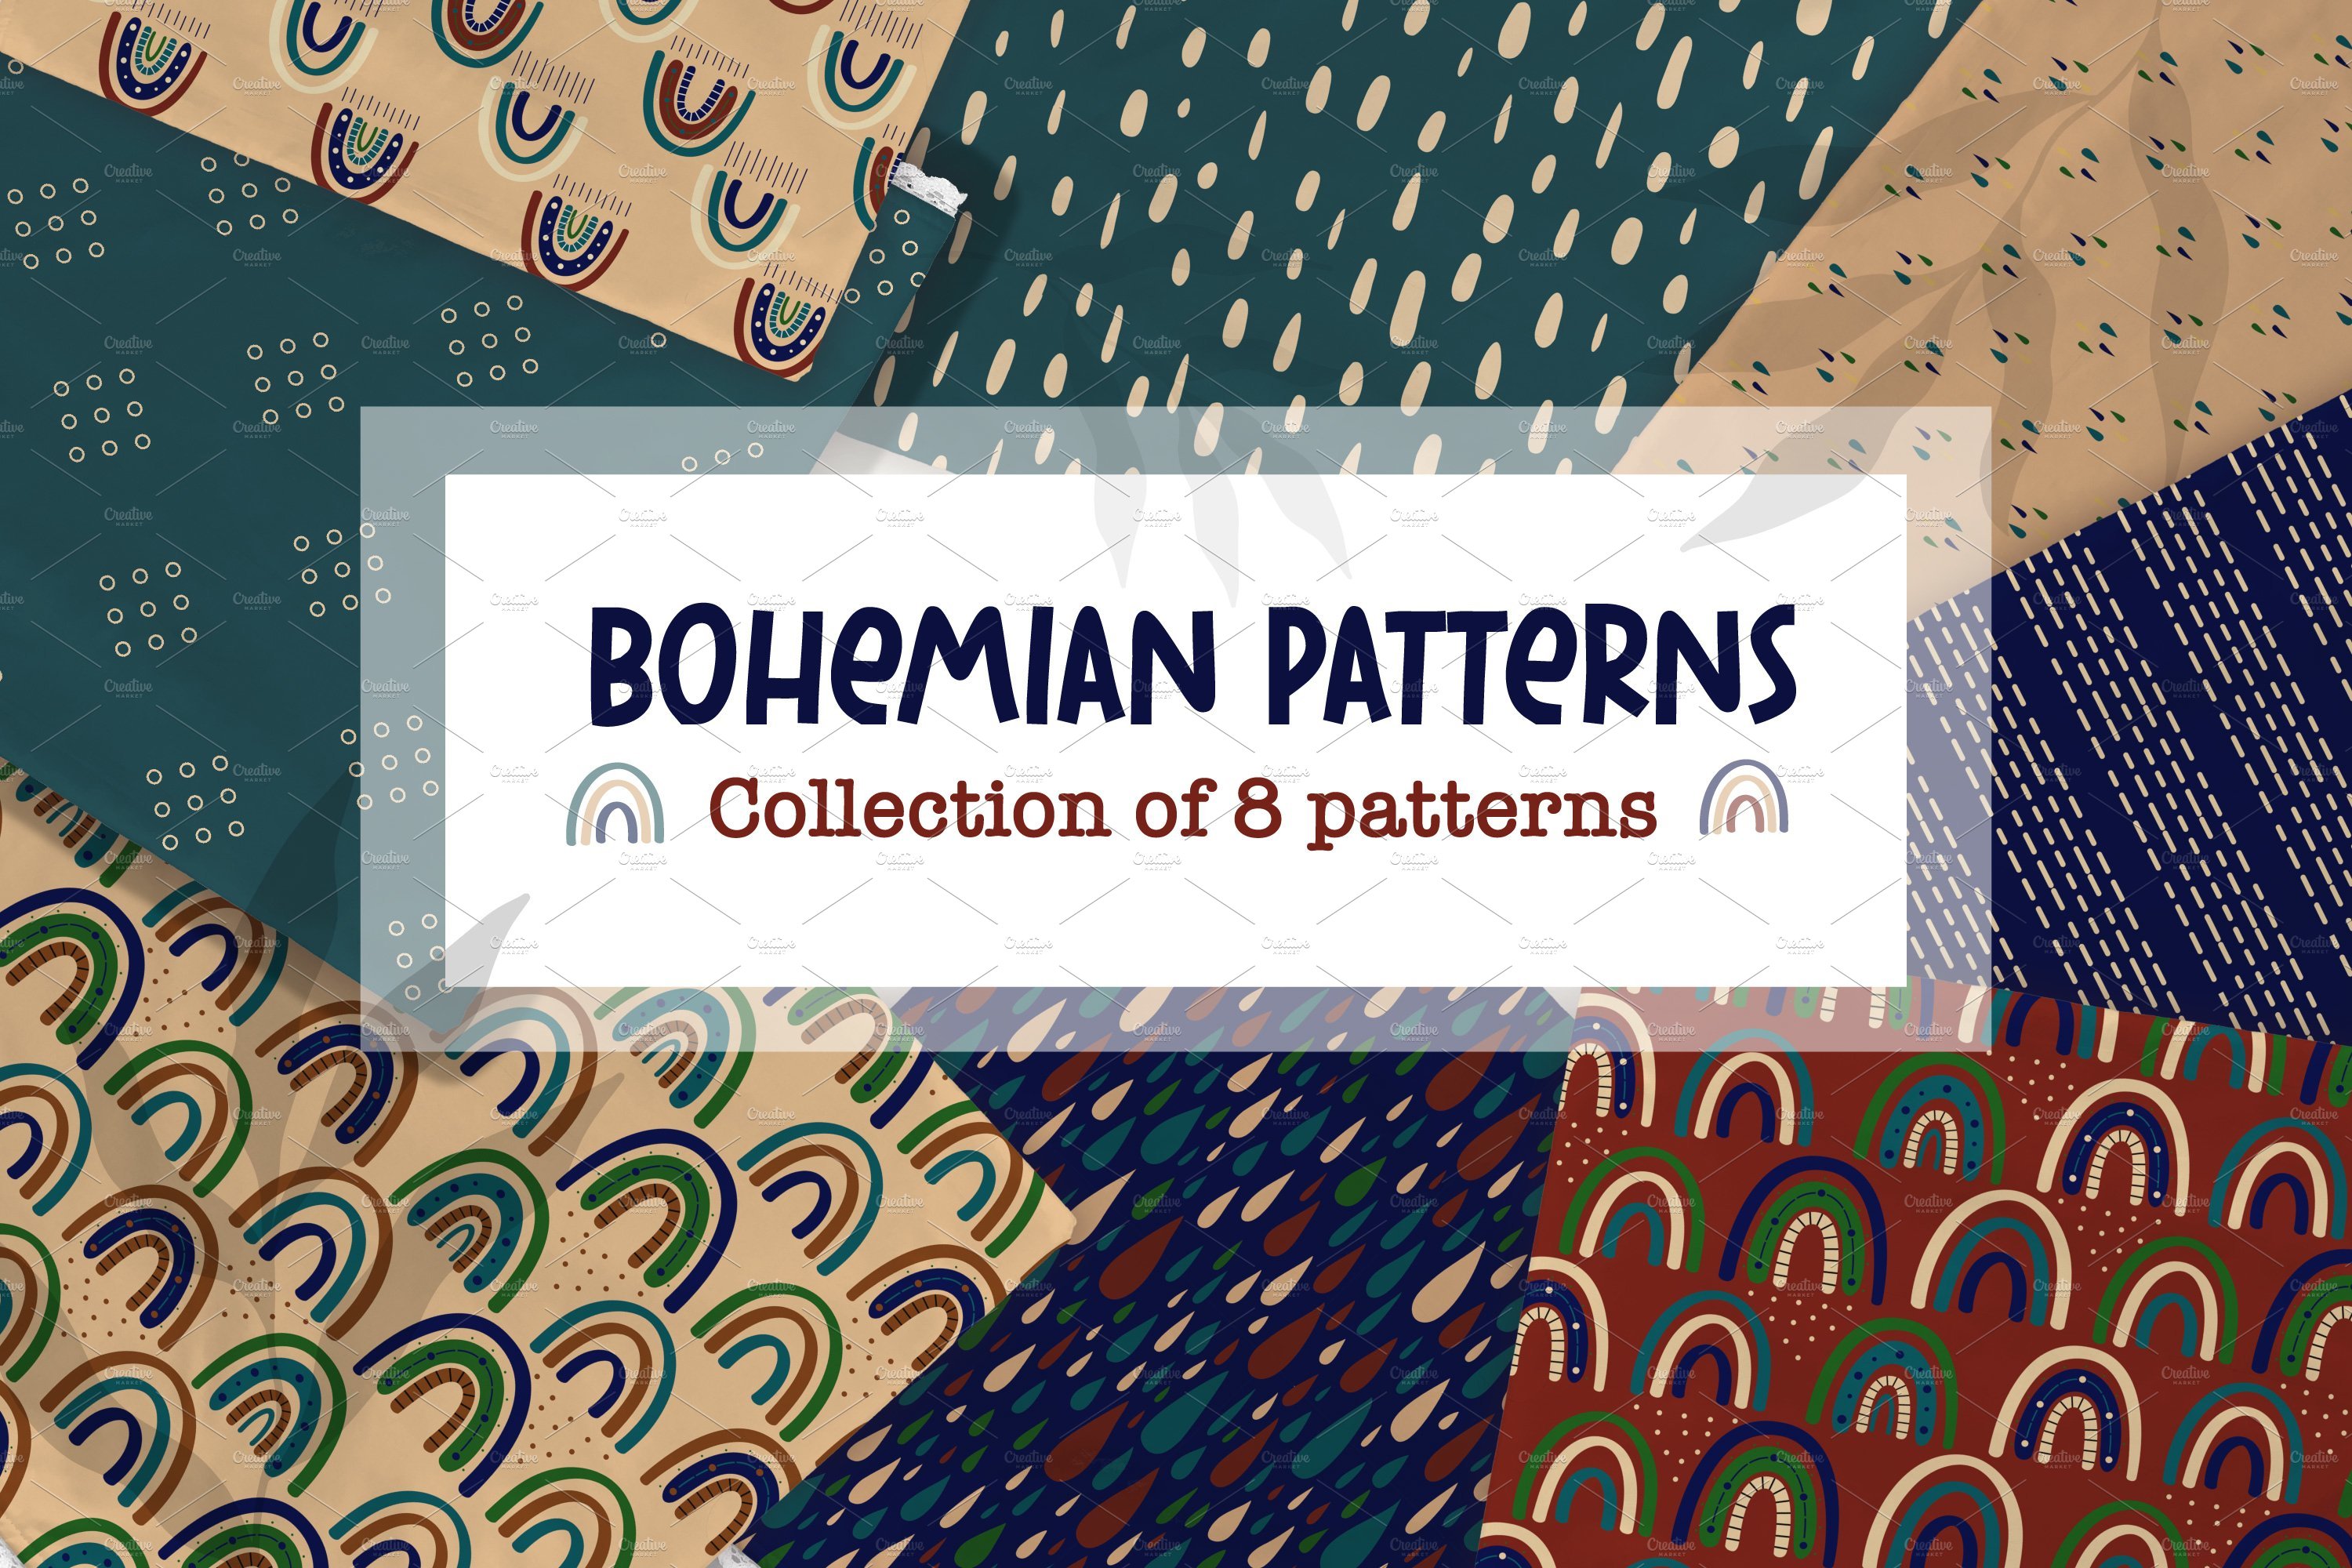 Bohemian patterns cover image.